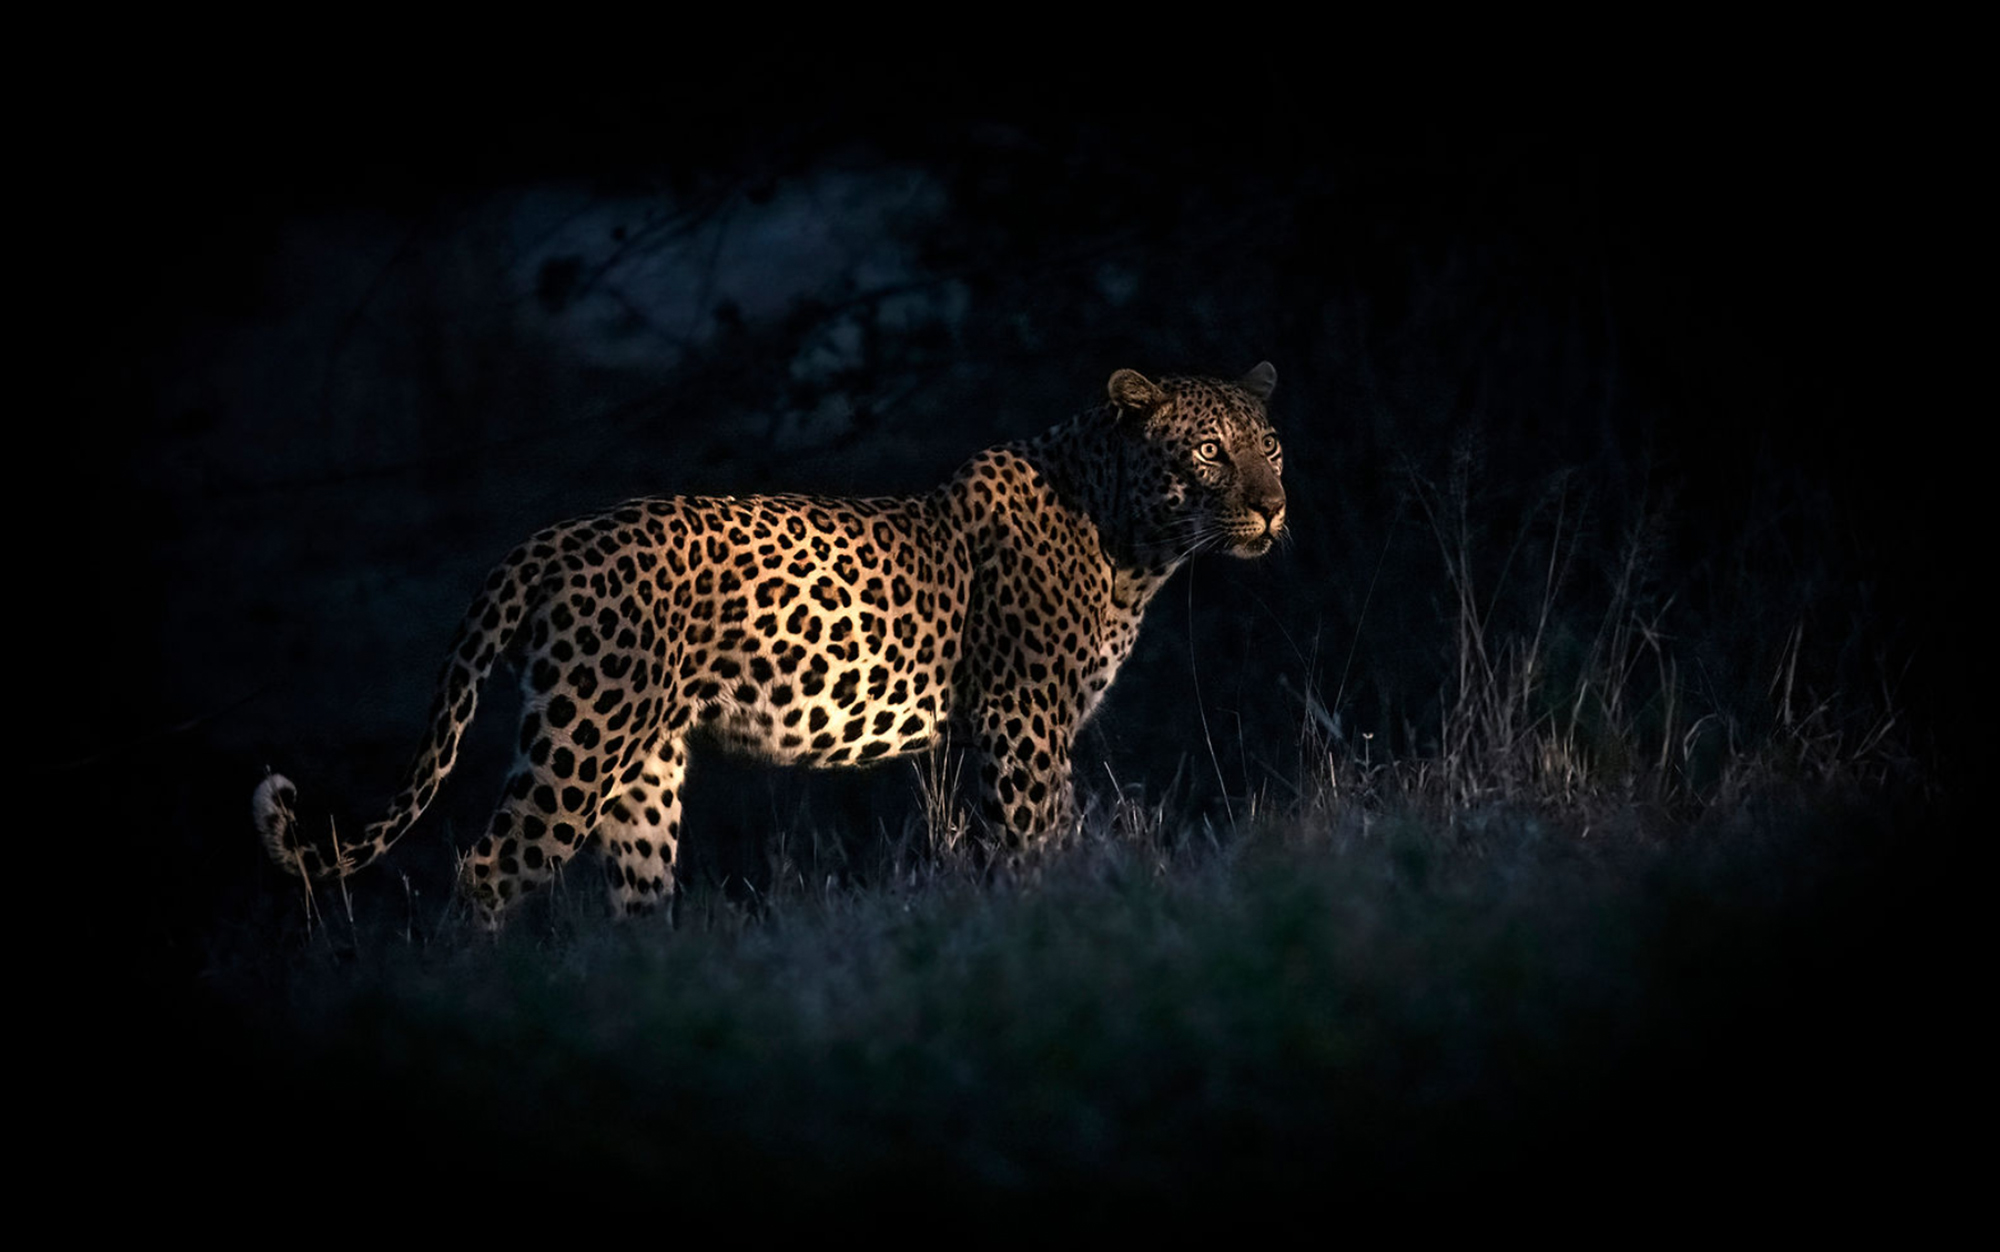 Jaguar is photographed at night.